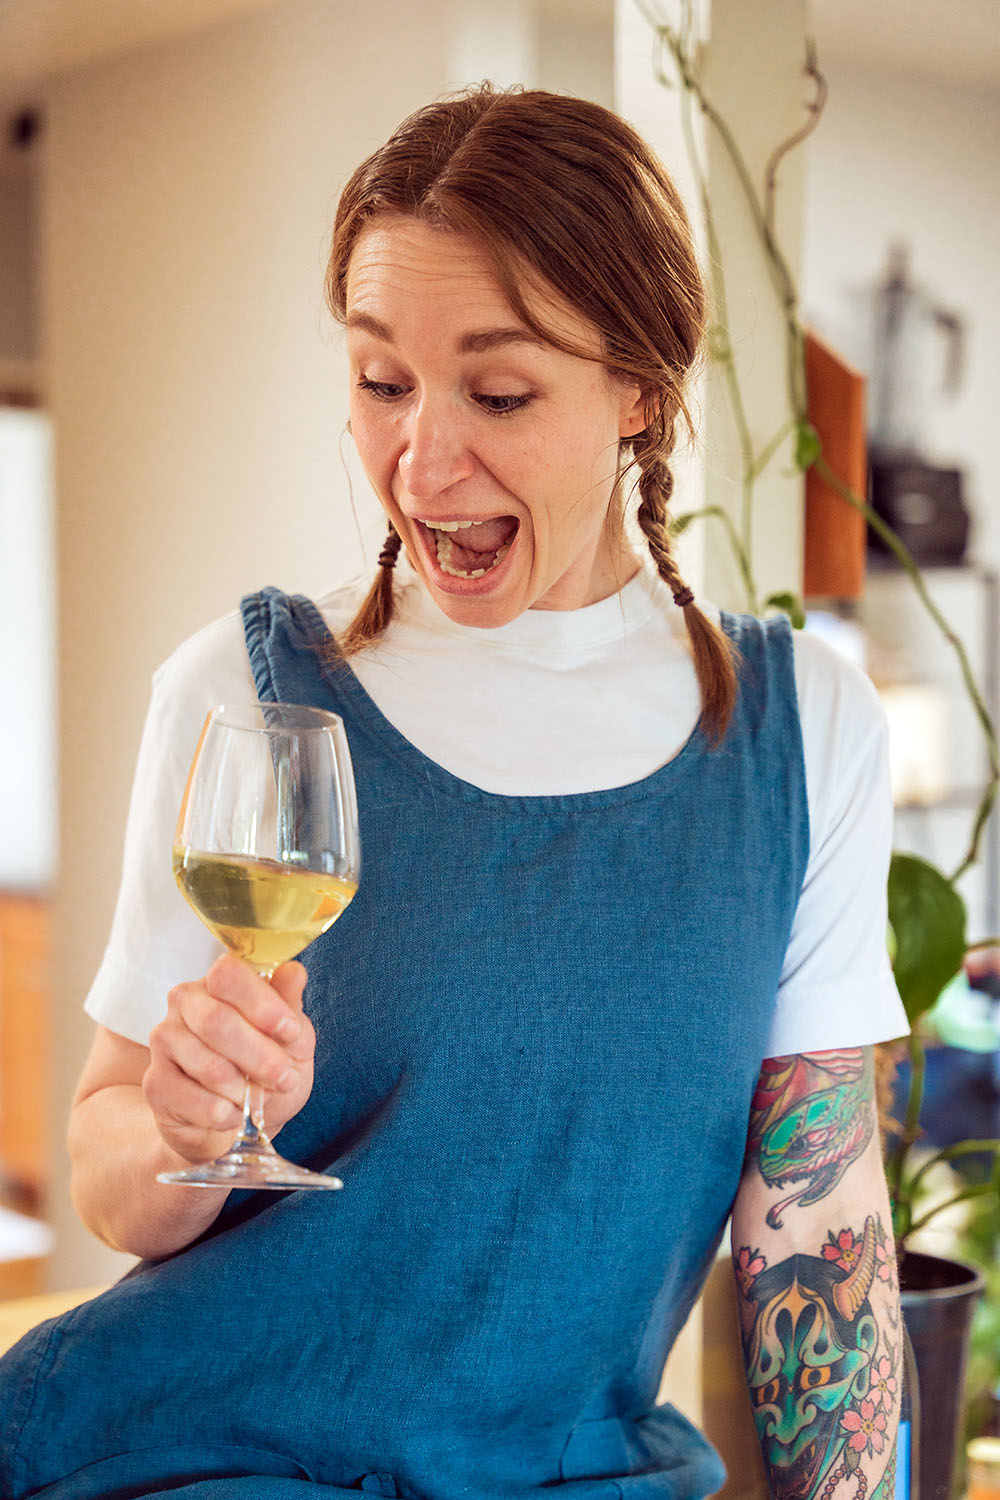 Top Chef contestant Sara Hauman drinking a glass of Massican white wine.